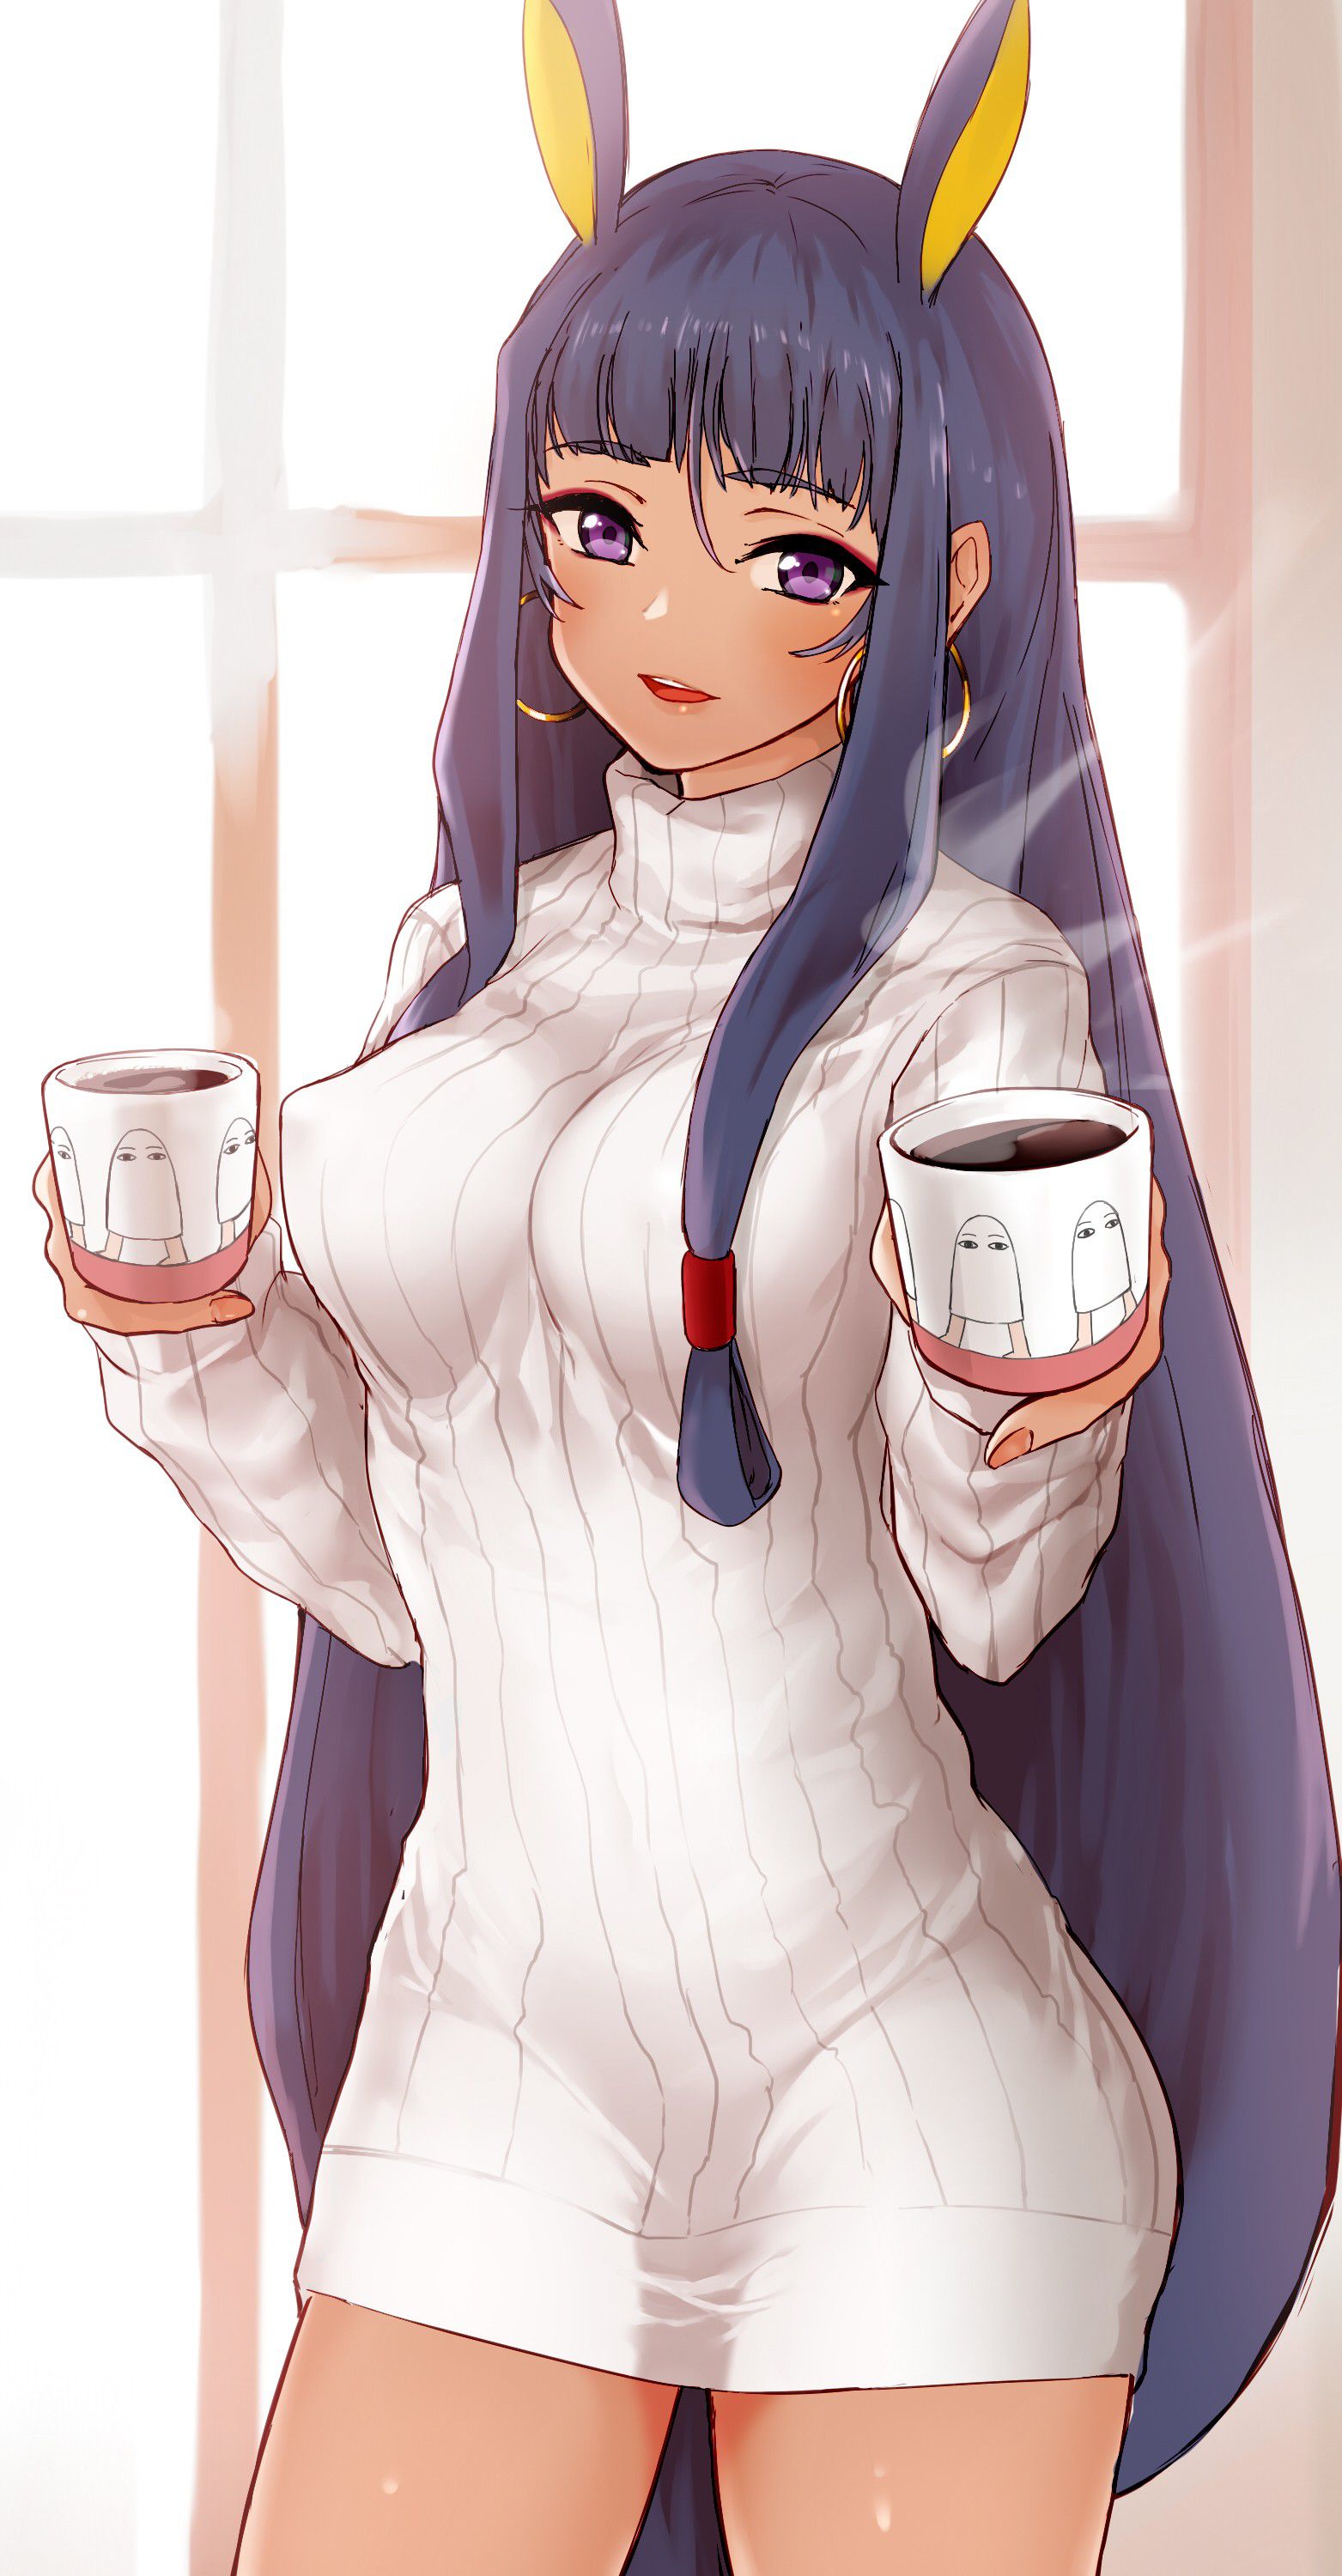 Secondary image of a cute girl who is drinking a drink [non-erotic] 9